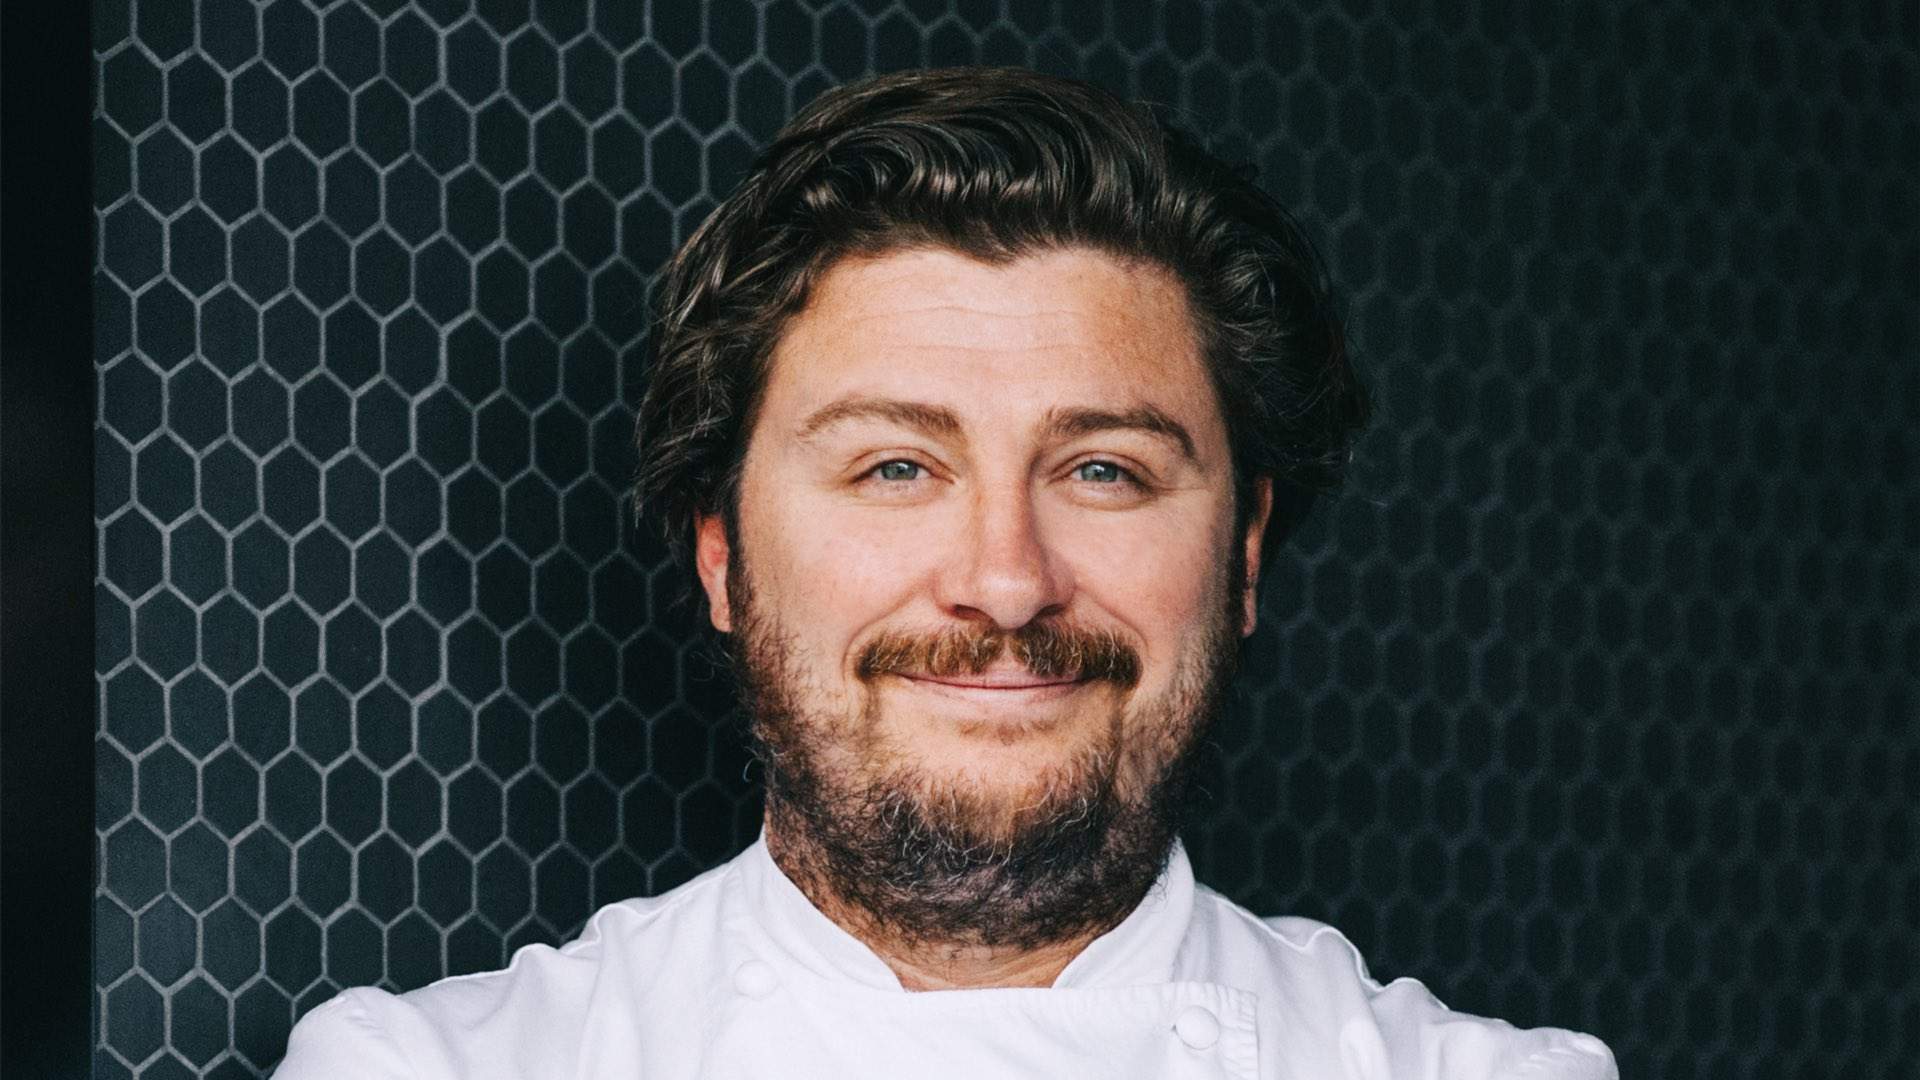 Melbourne Is Getting a New Riverside Food Precinct Curated by Acclaimed Chef Scott Pickett